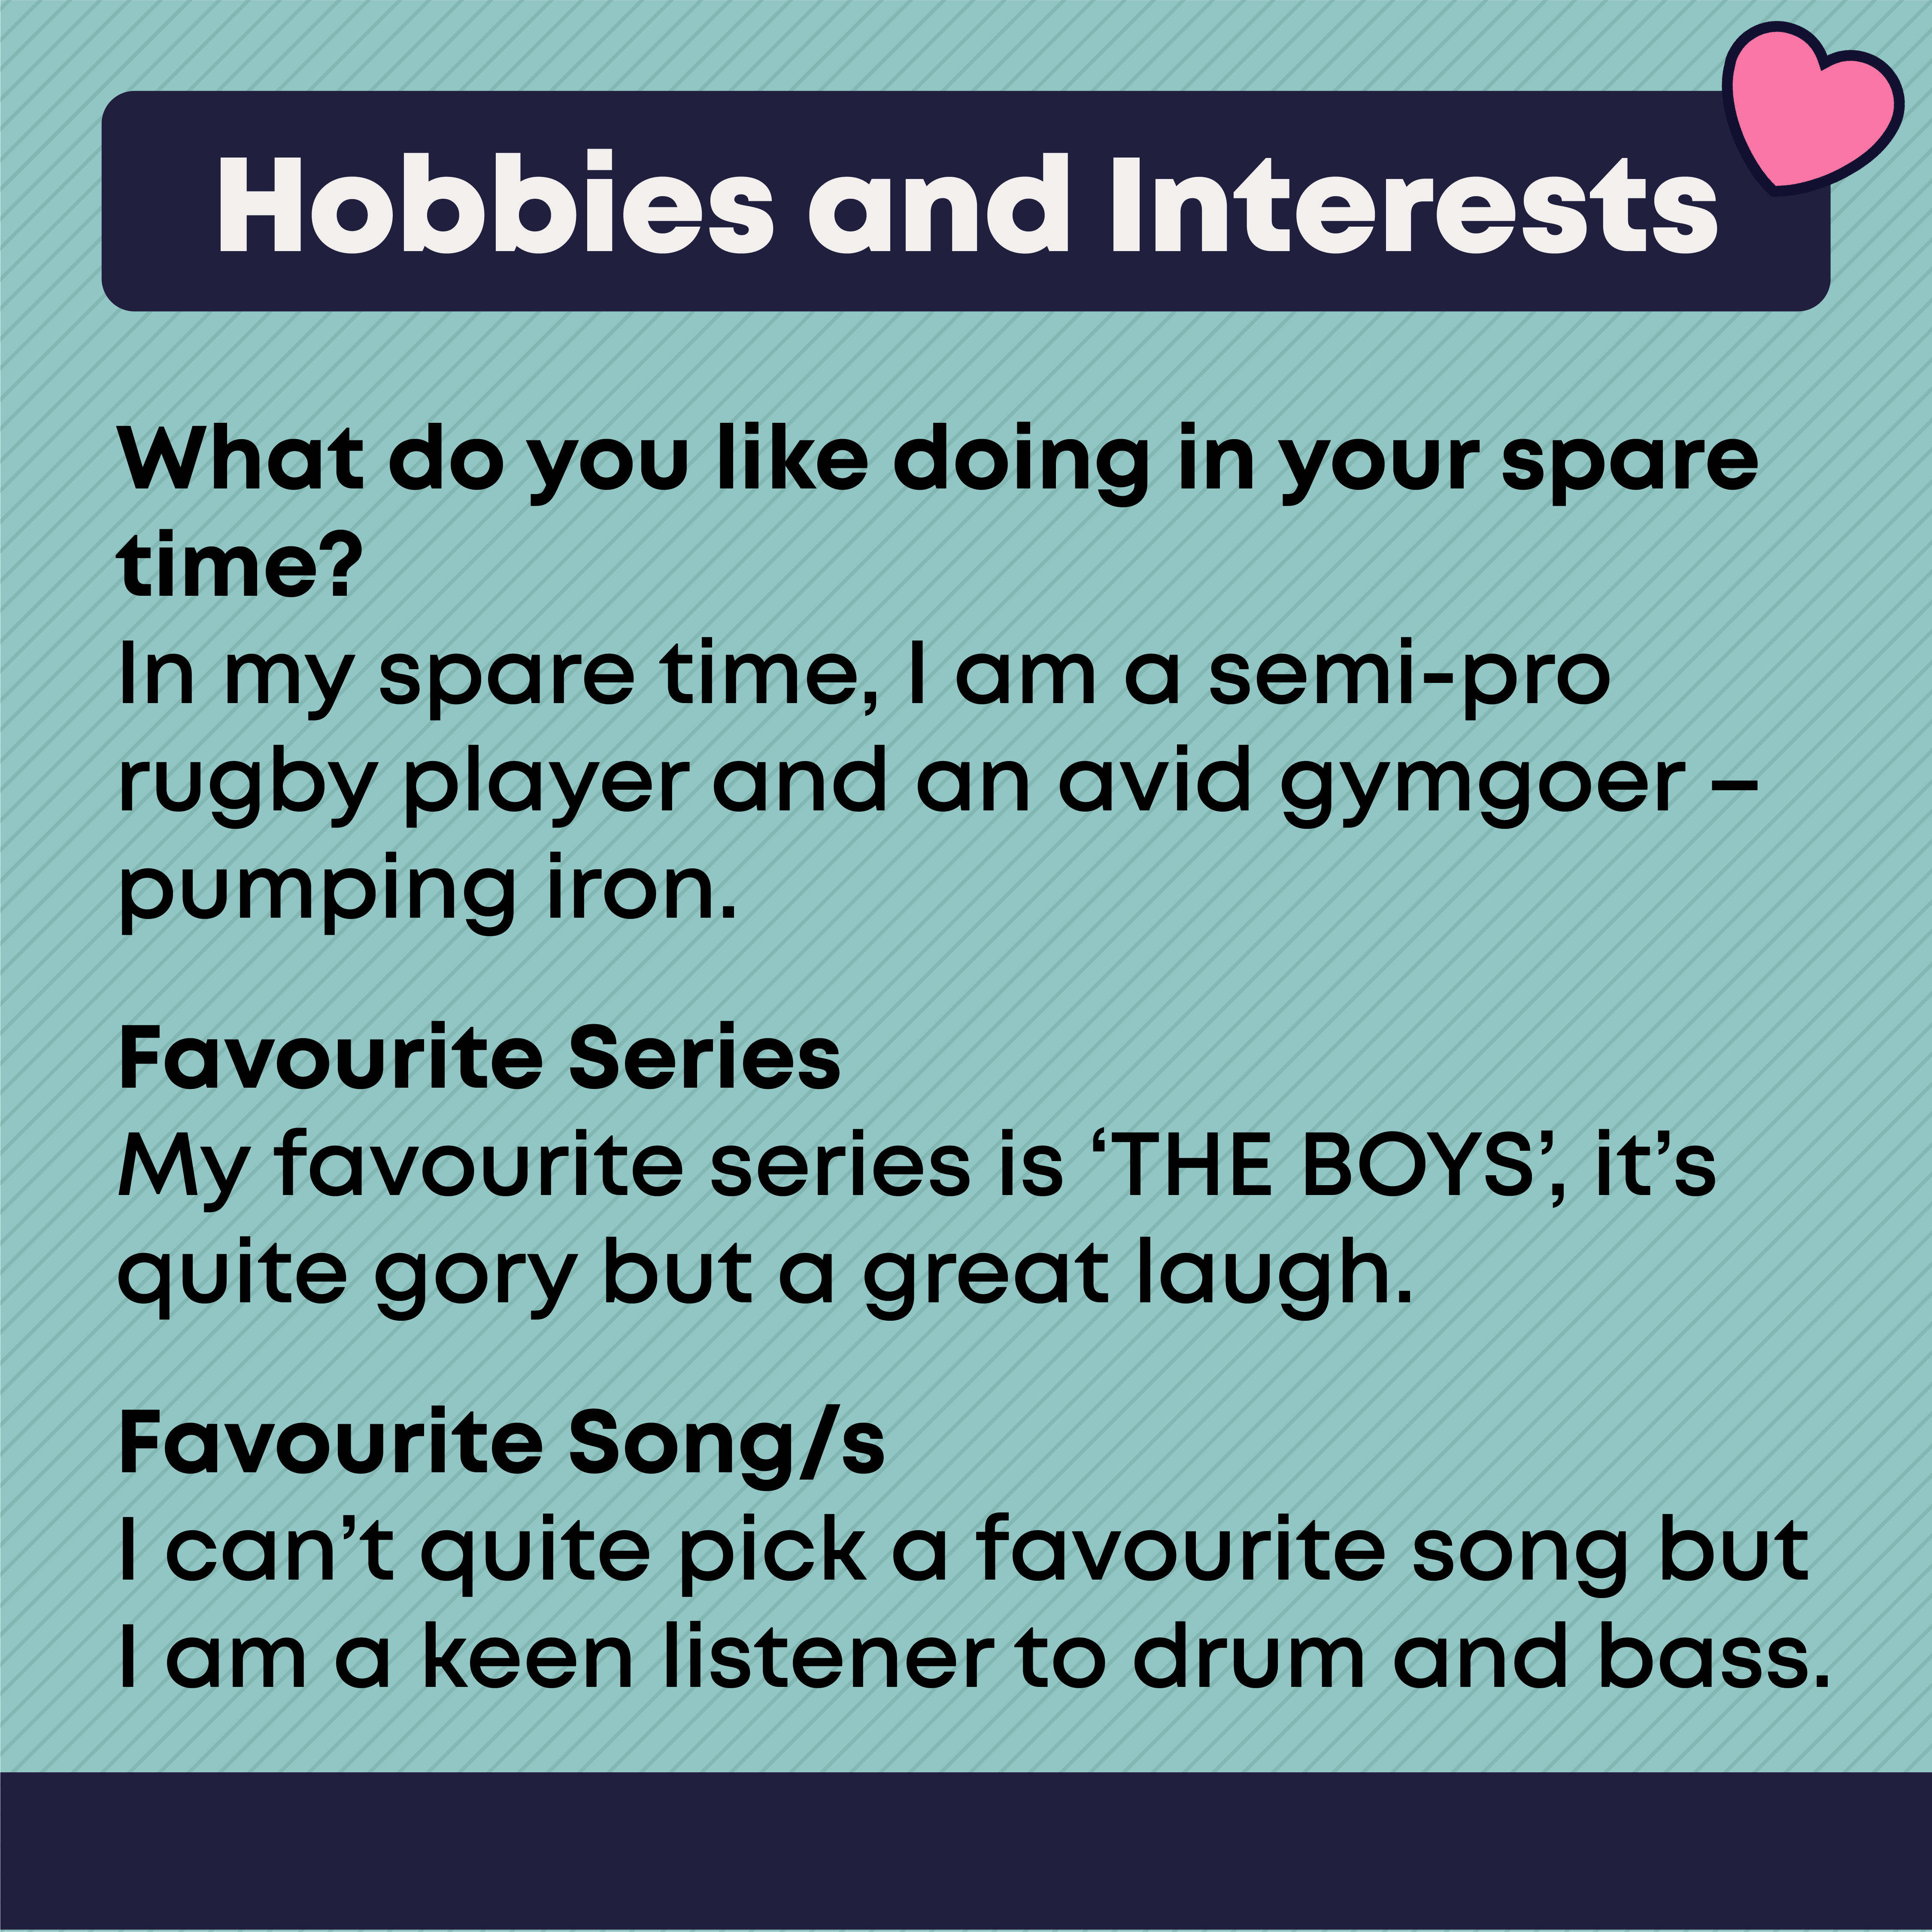 Hobbies and Interests  What do you like doing in your spare time  In my spare time, I am a semi-pro rugby player and an avid gymgoer – pumping iron.  Favourite Series   My favourite series is ‘THE BOYS’, it’s quite gory but a great laugh.  Favourite Song/s  I can’t quite pick a favourite song but I am a keen listener to drum and bass.